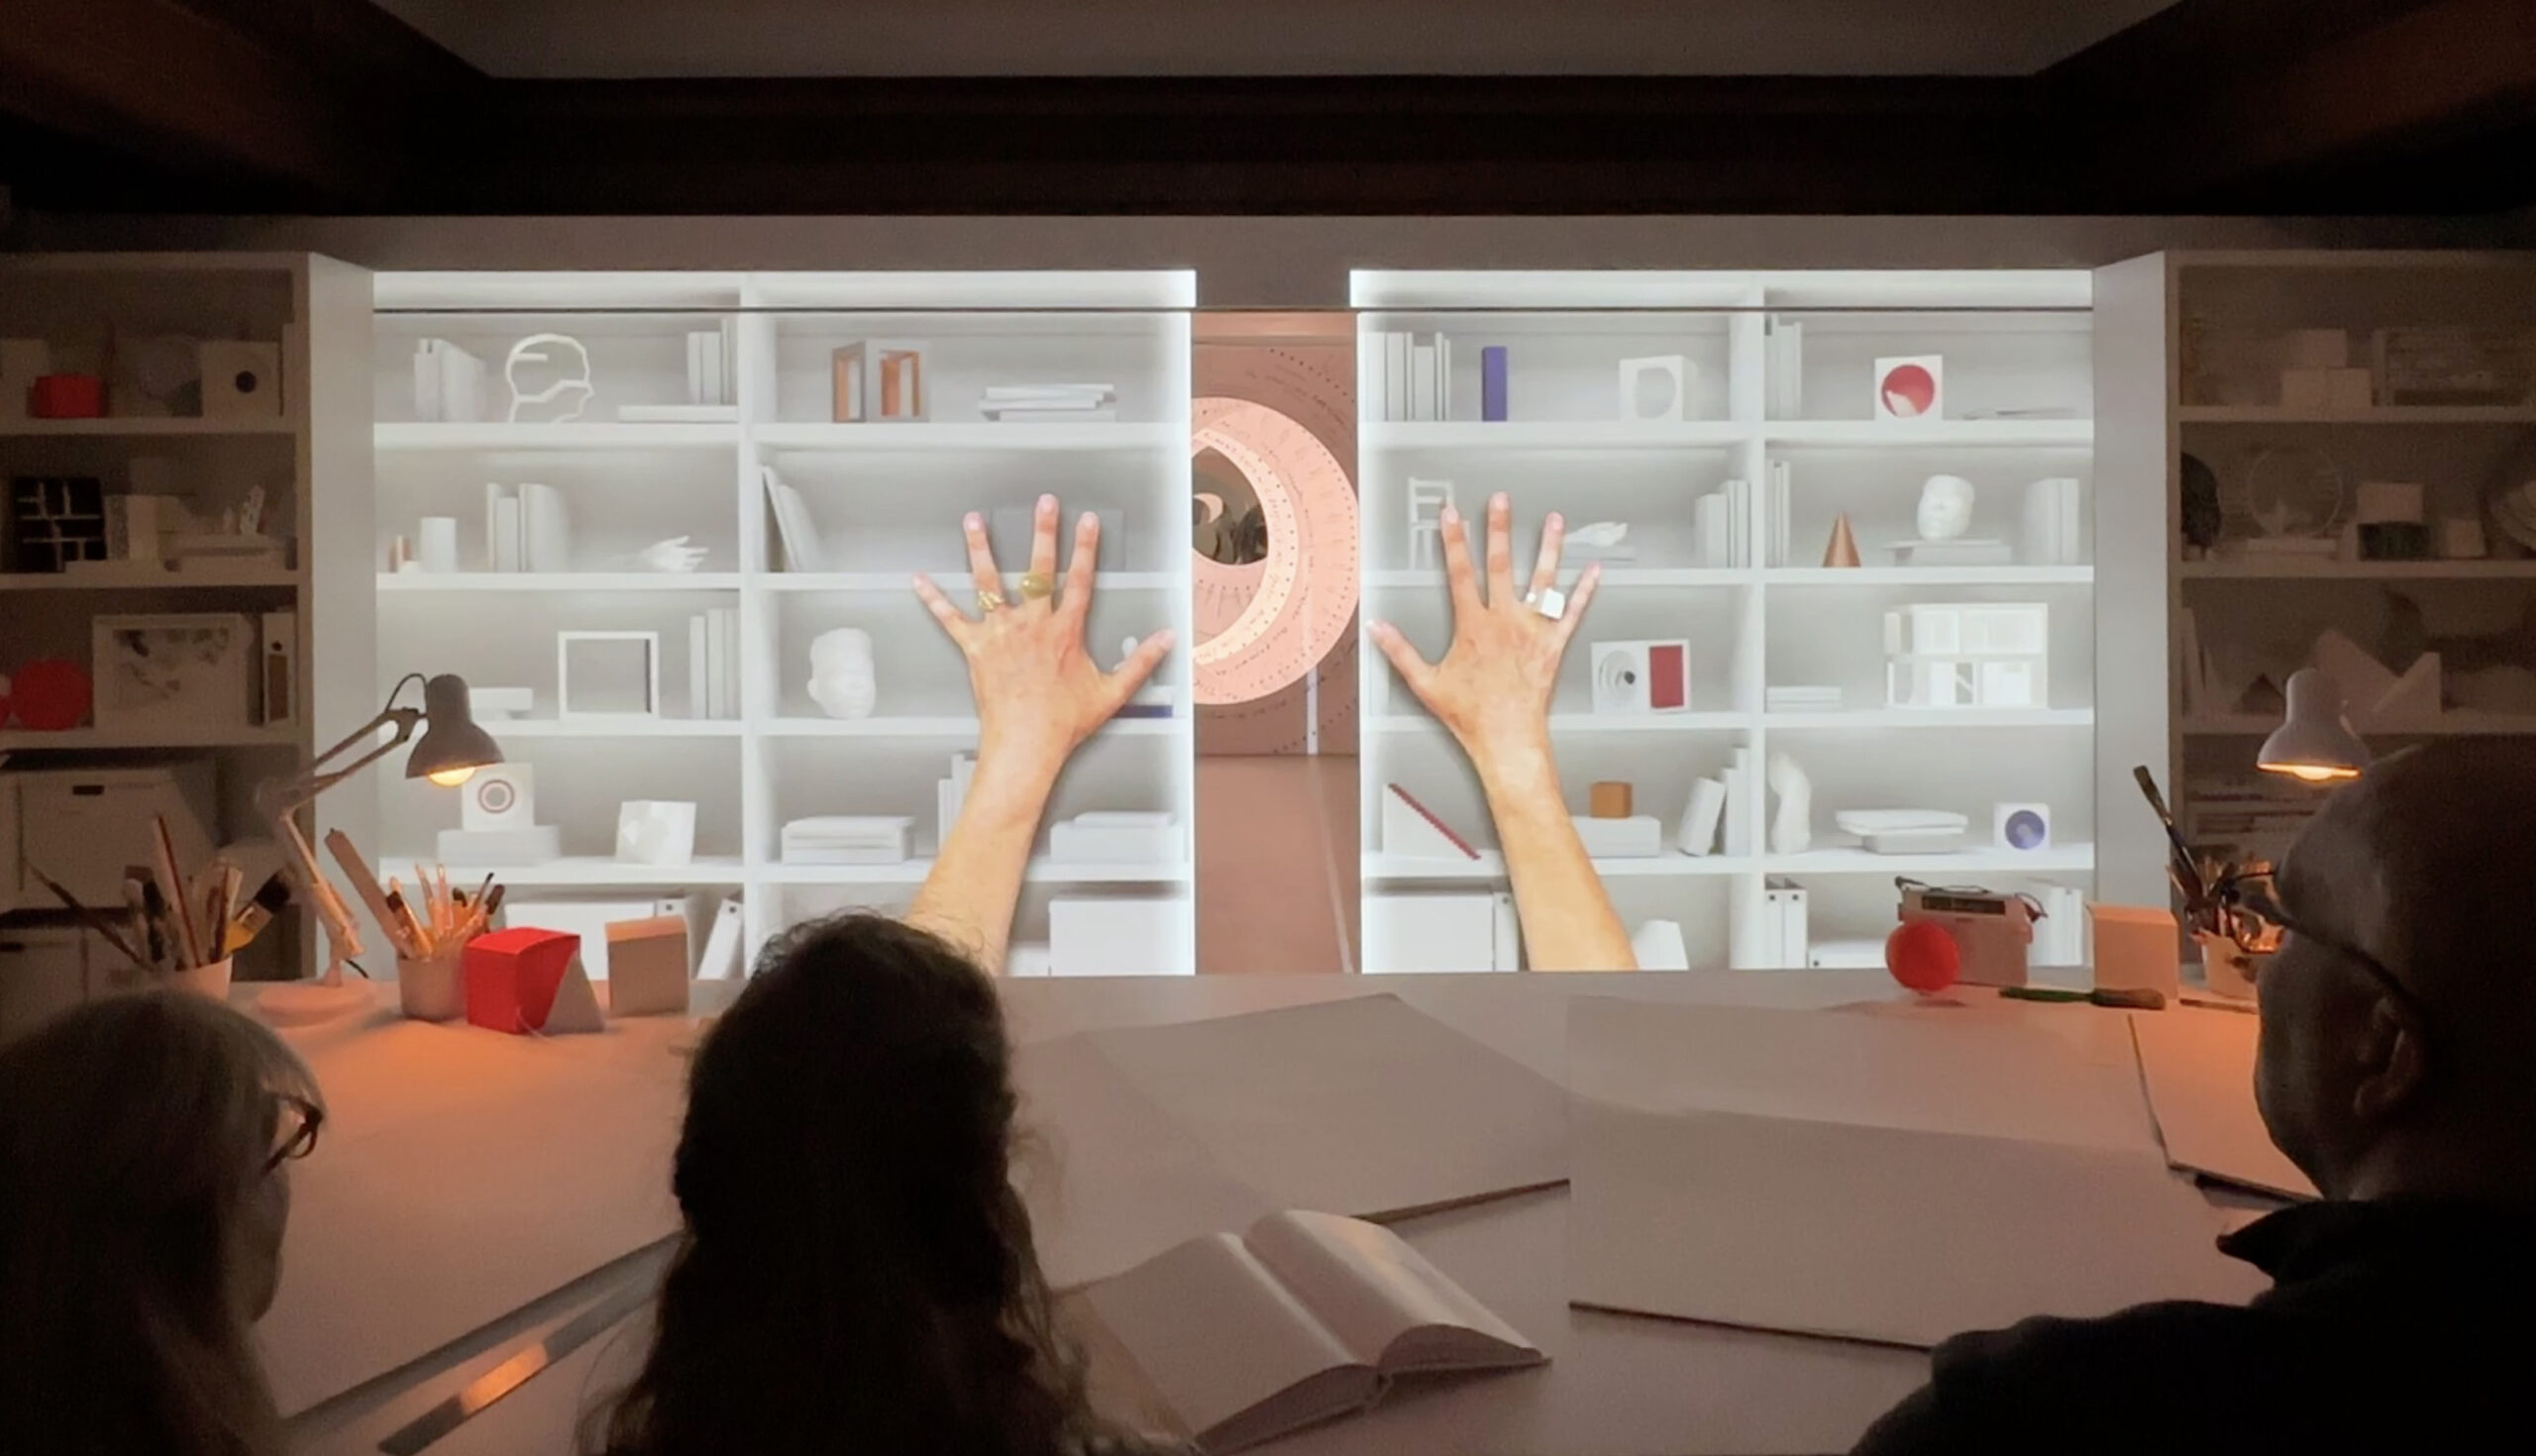 Three people sit and watch a wall split open down the middle. The wall is projected to look like the bookshelves in the room around it, with two larger-than-life hands pushing the wall open.